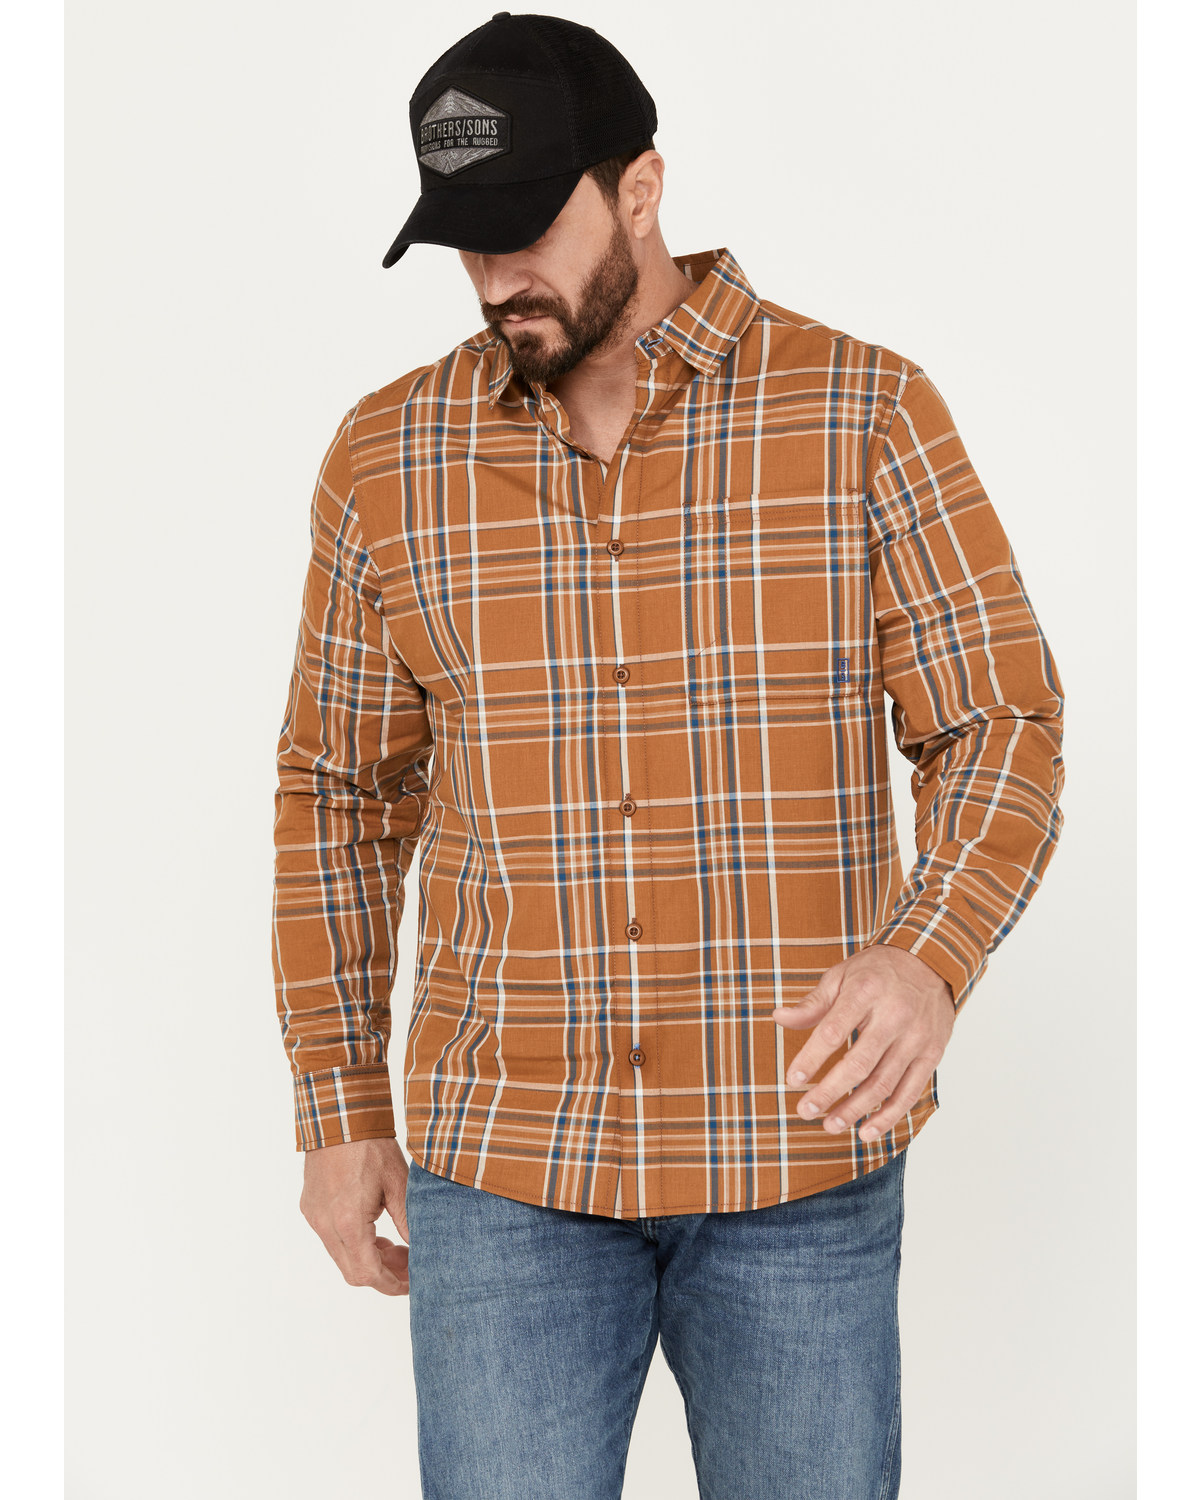 Brothers and Sons Men's Cheyenne Plaid Print Long Sleeve Button-Down Western Shirt